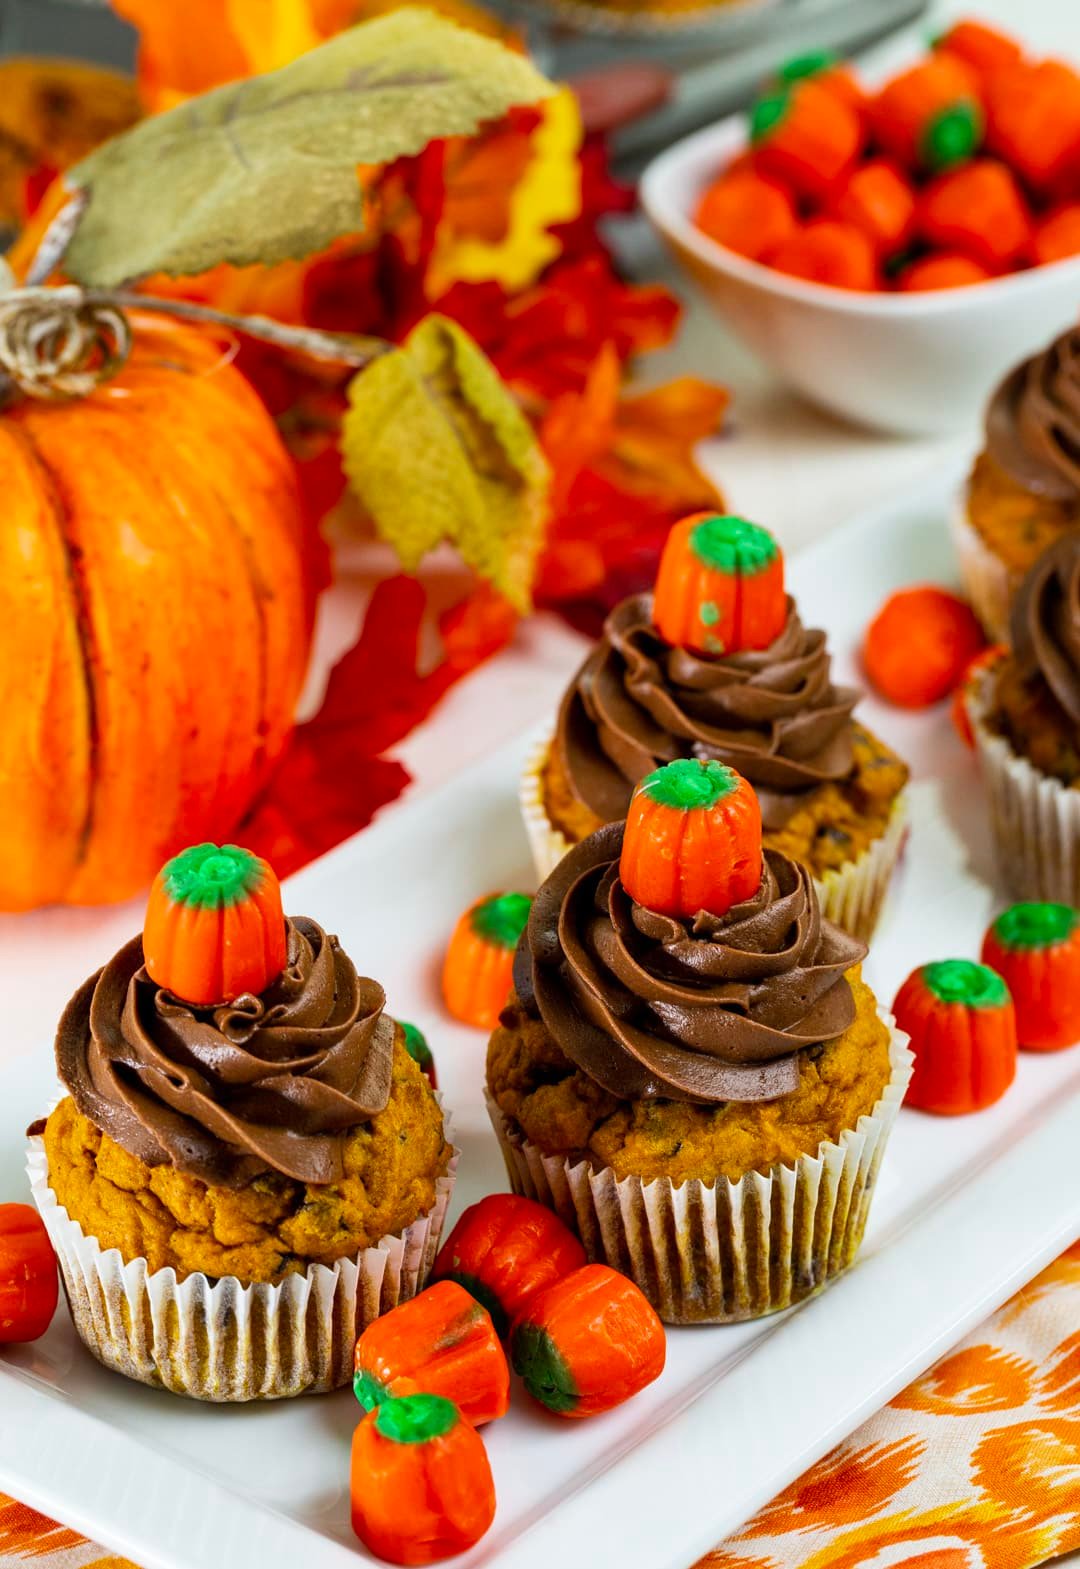 Pumpkin Chocolate Chip Cupcakes surrounded by candy corn pumpkins.